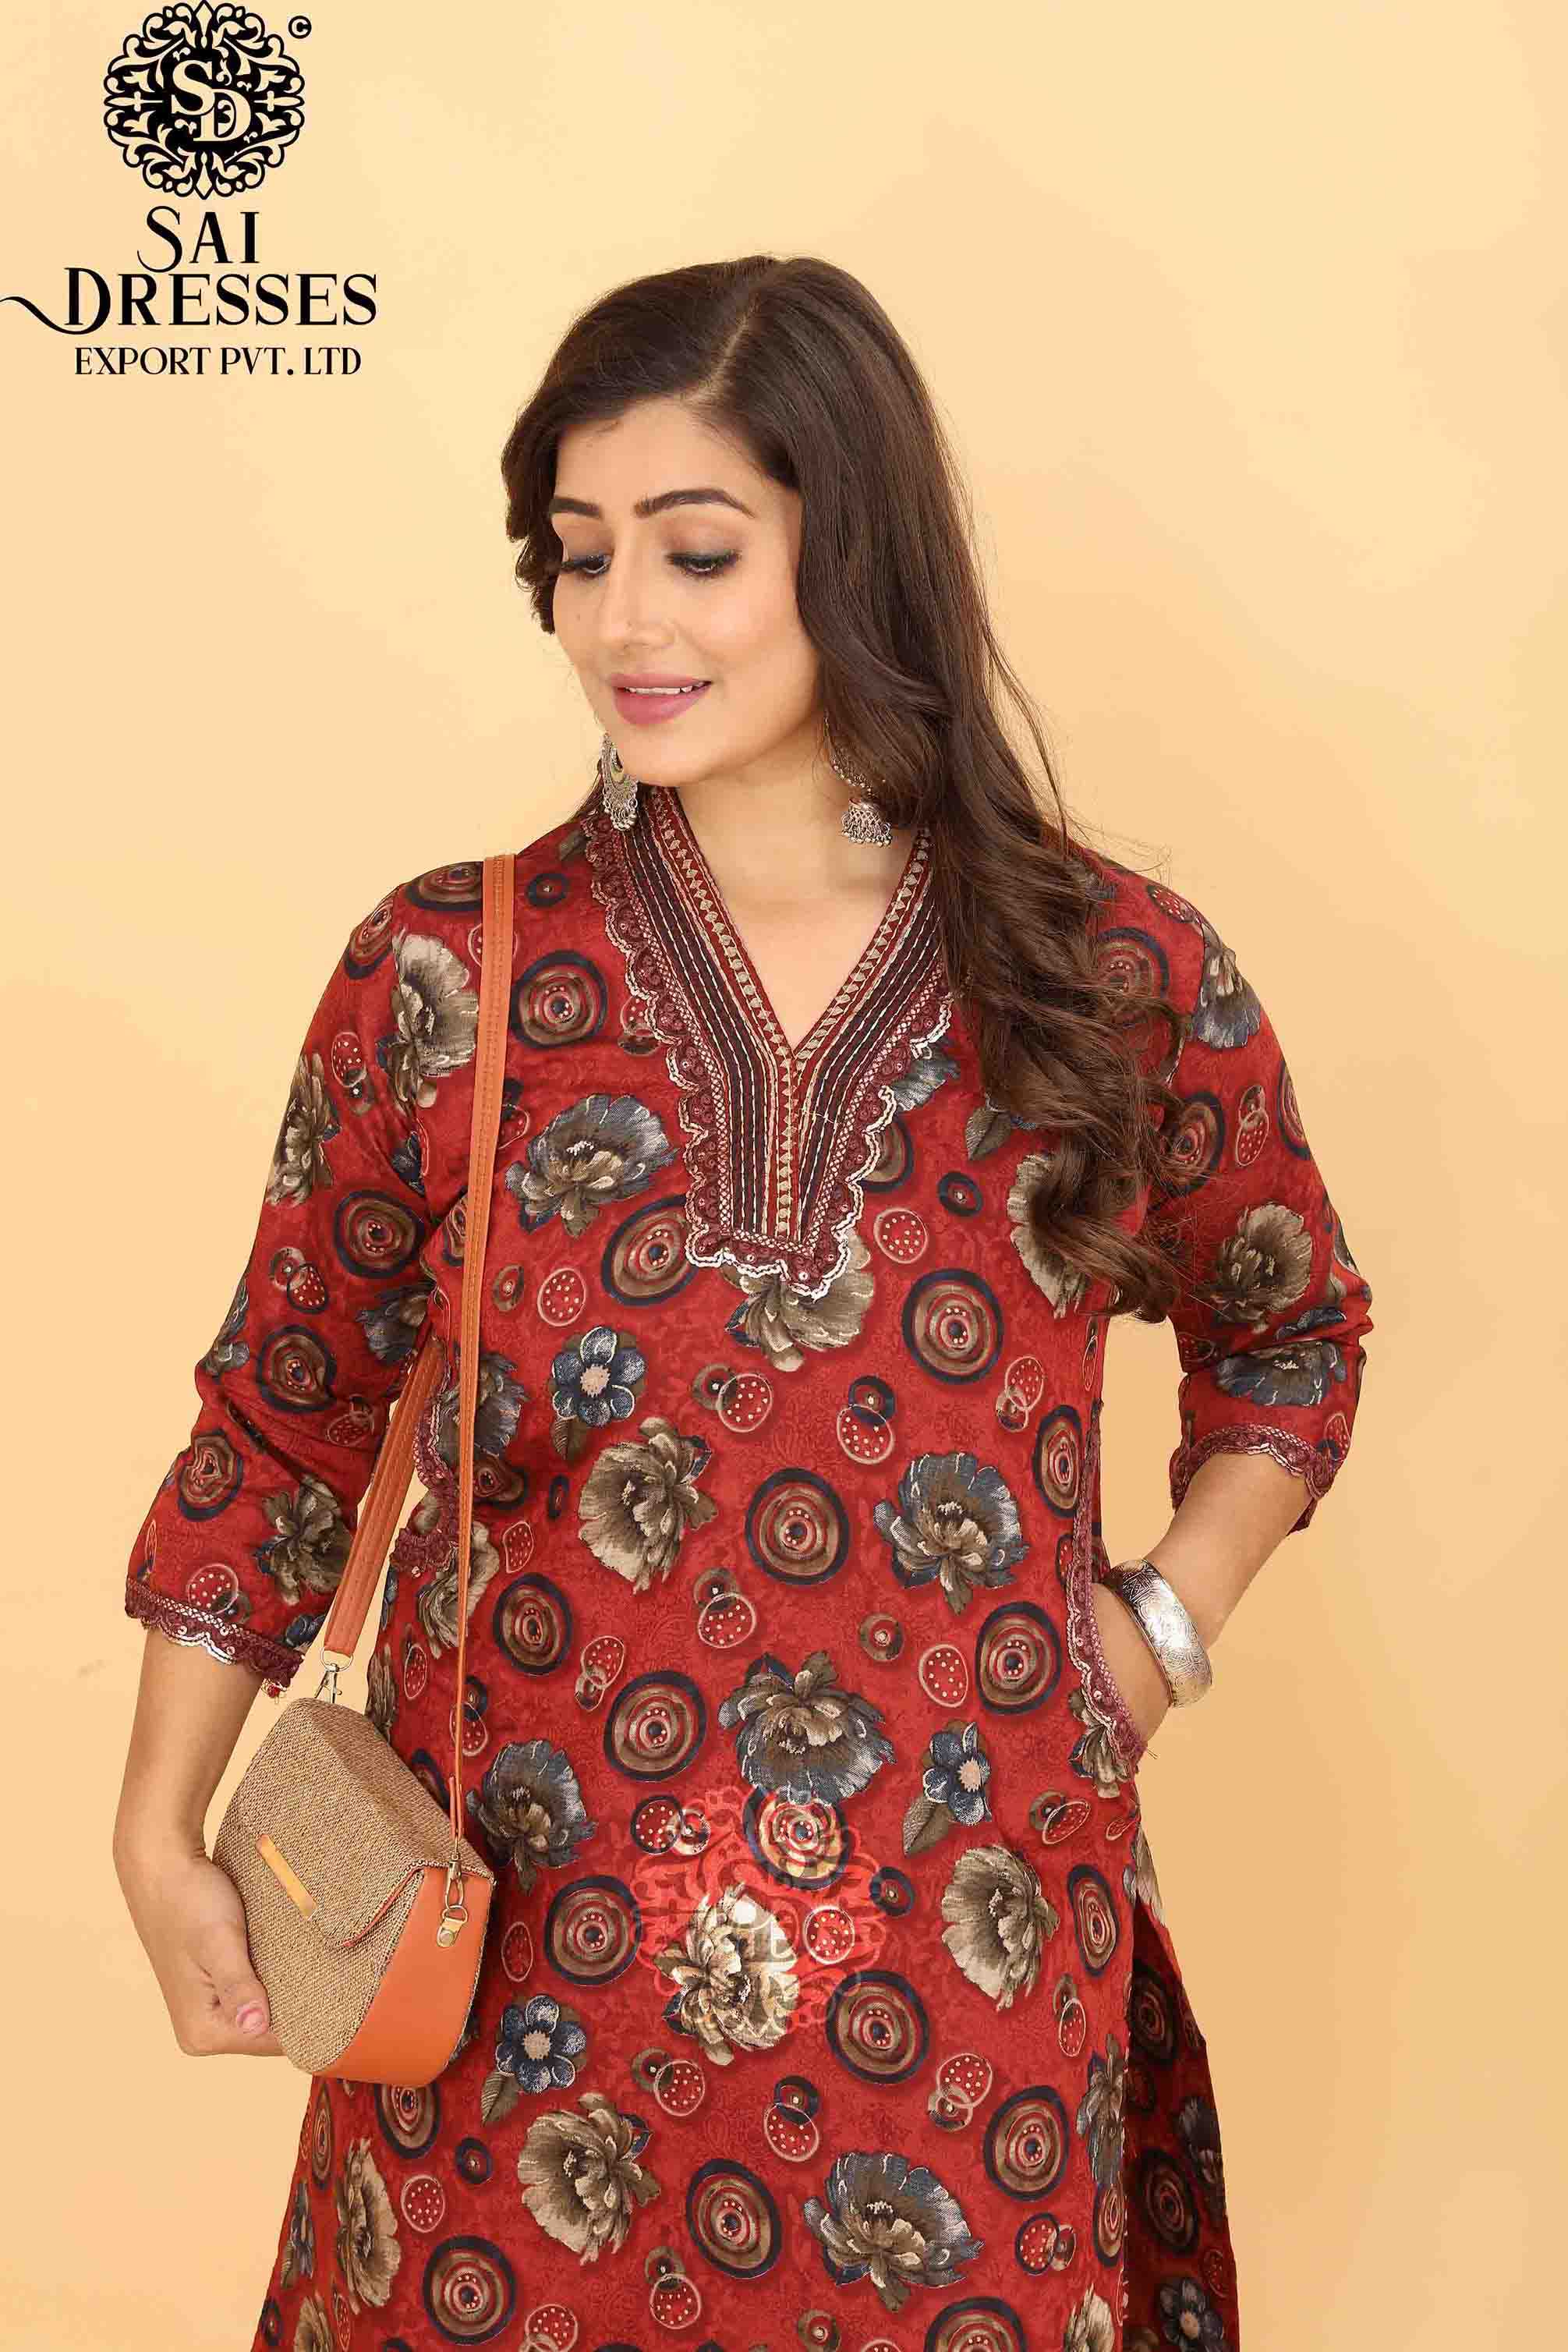 SAI DRESSES PRESENT D.NO SD 5013 READY TO EXCLUSIVE TRENDY WEAR PATHANI KURTA WITH AFGHANI PANT STYLE COMBO COLLECTION IN WHOLESALE RATE IN SURAT